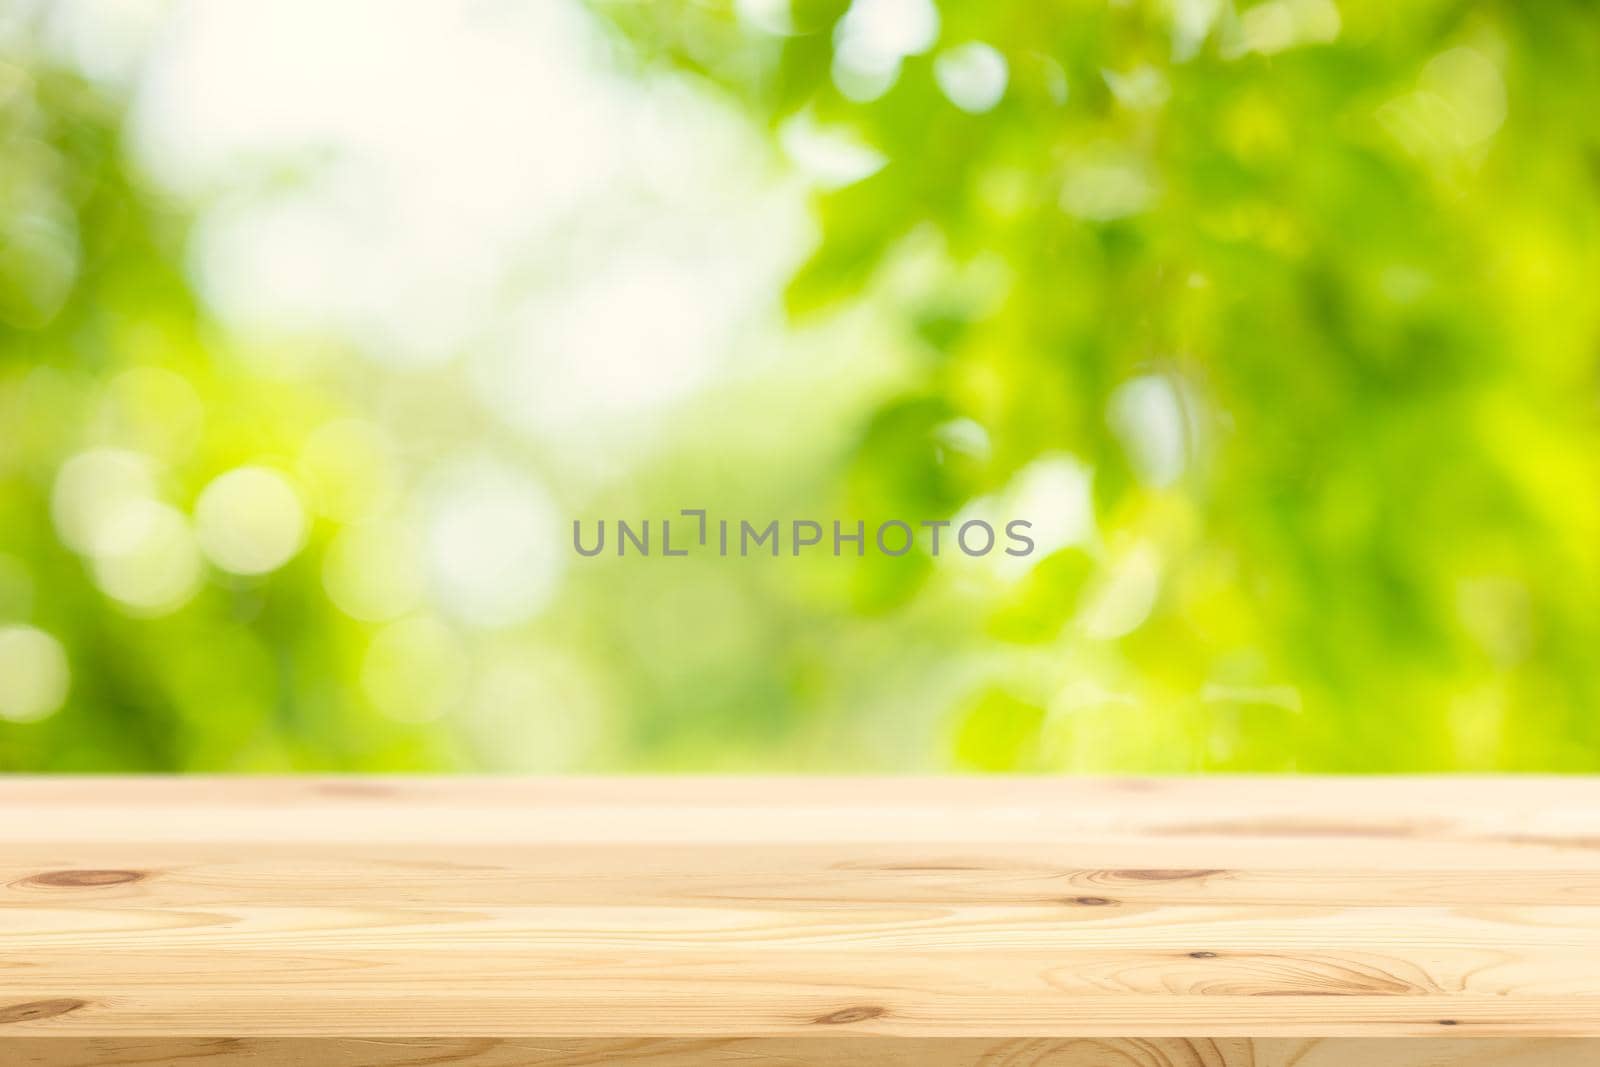 Blur green garden nature background with wooden table space for products advertising montage overlay template. by qualitystocks